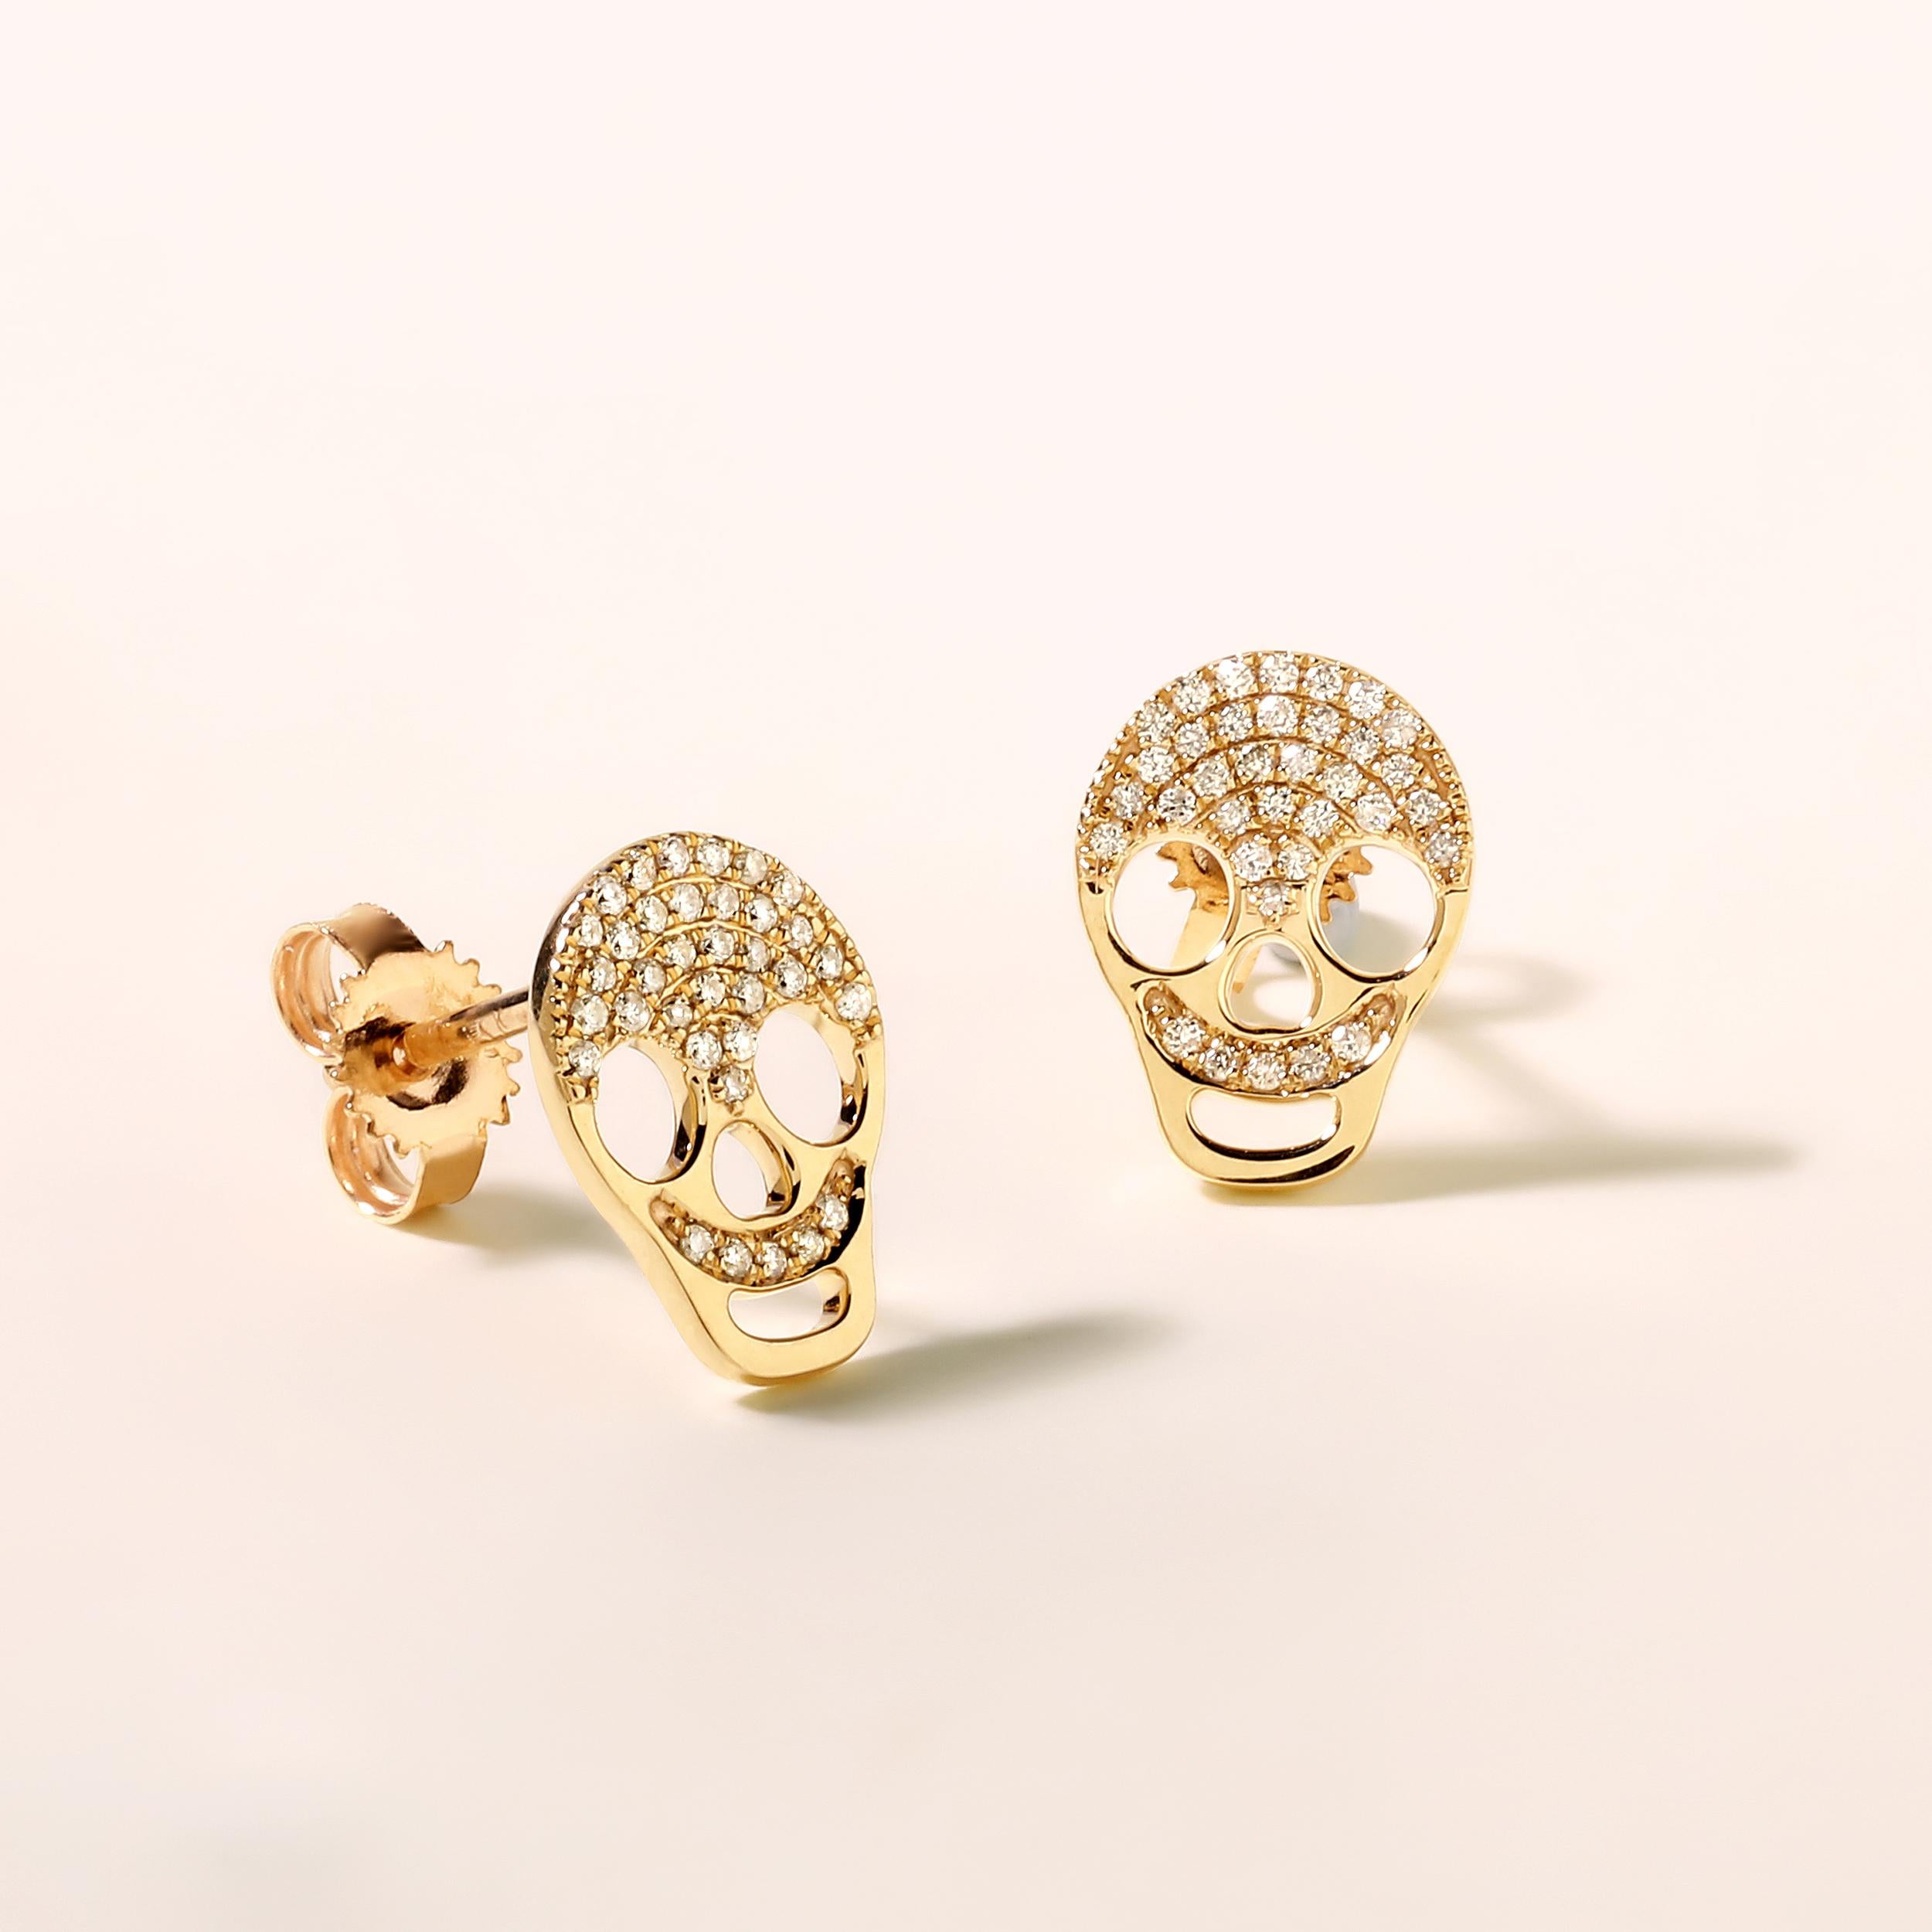 Crafted in 1.39 grams of 14K Yellow Gold, the earrings contains 70 stones of Round Diamonds with a total of 0.14 carat in F-G color and SI clarity.

CONTEMPORARY AND TIMELESS ESSENCE: Crafted in 14-karat/18-karat with 100% natural diamond and